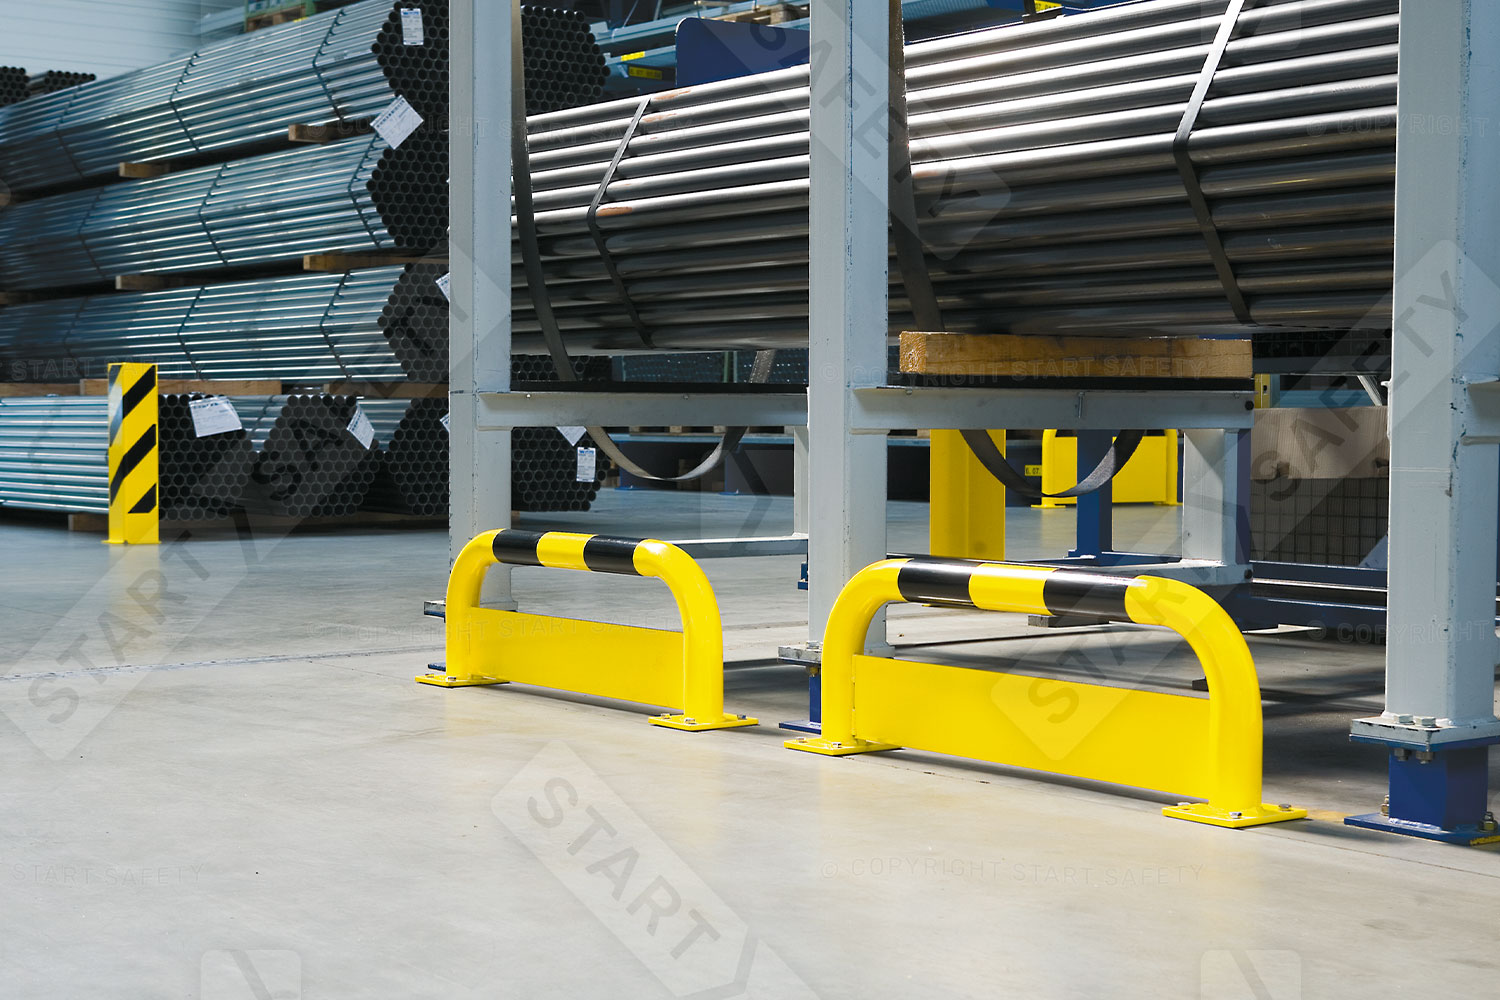 Black Bull Hoop Barriers With Under-Run Protection